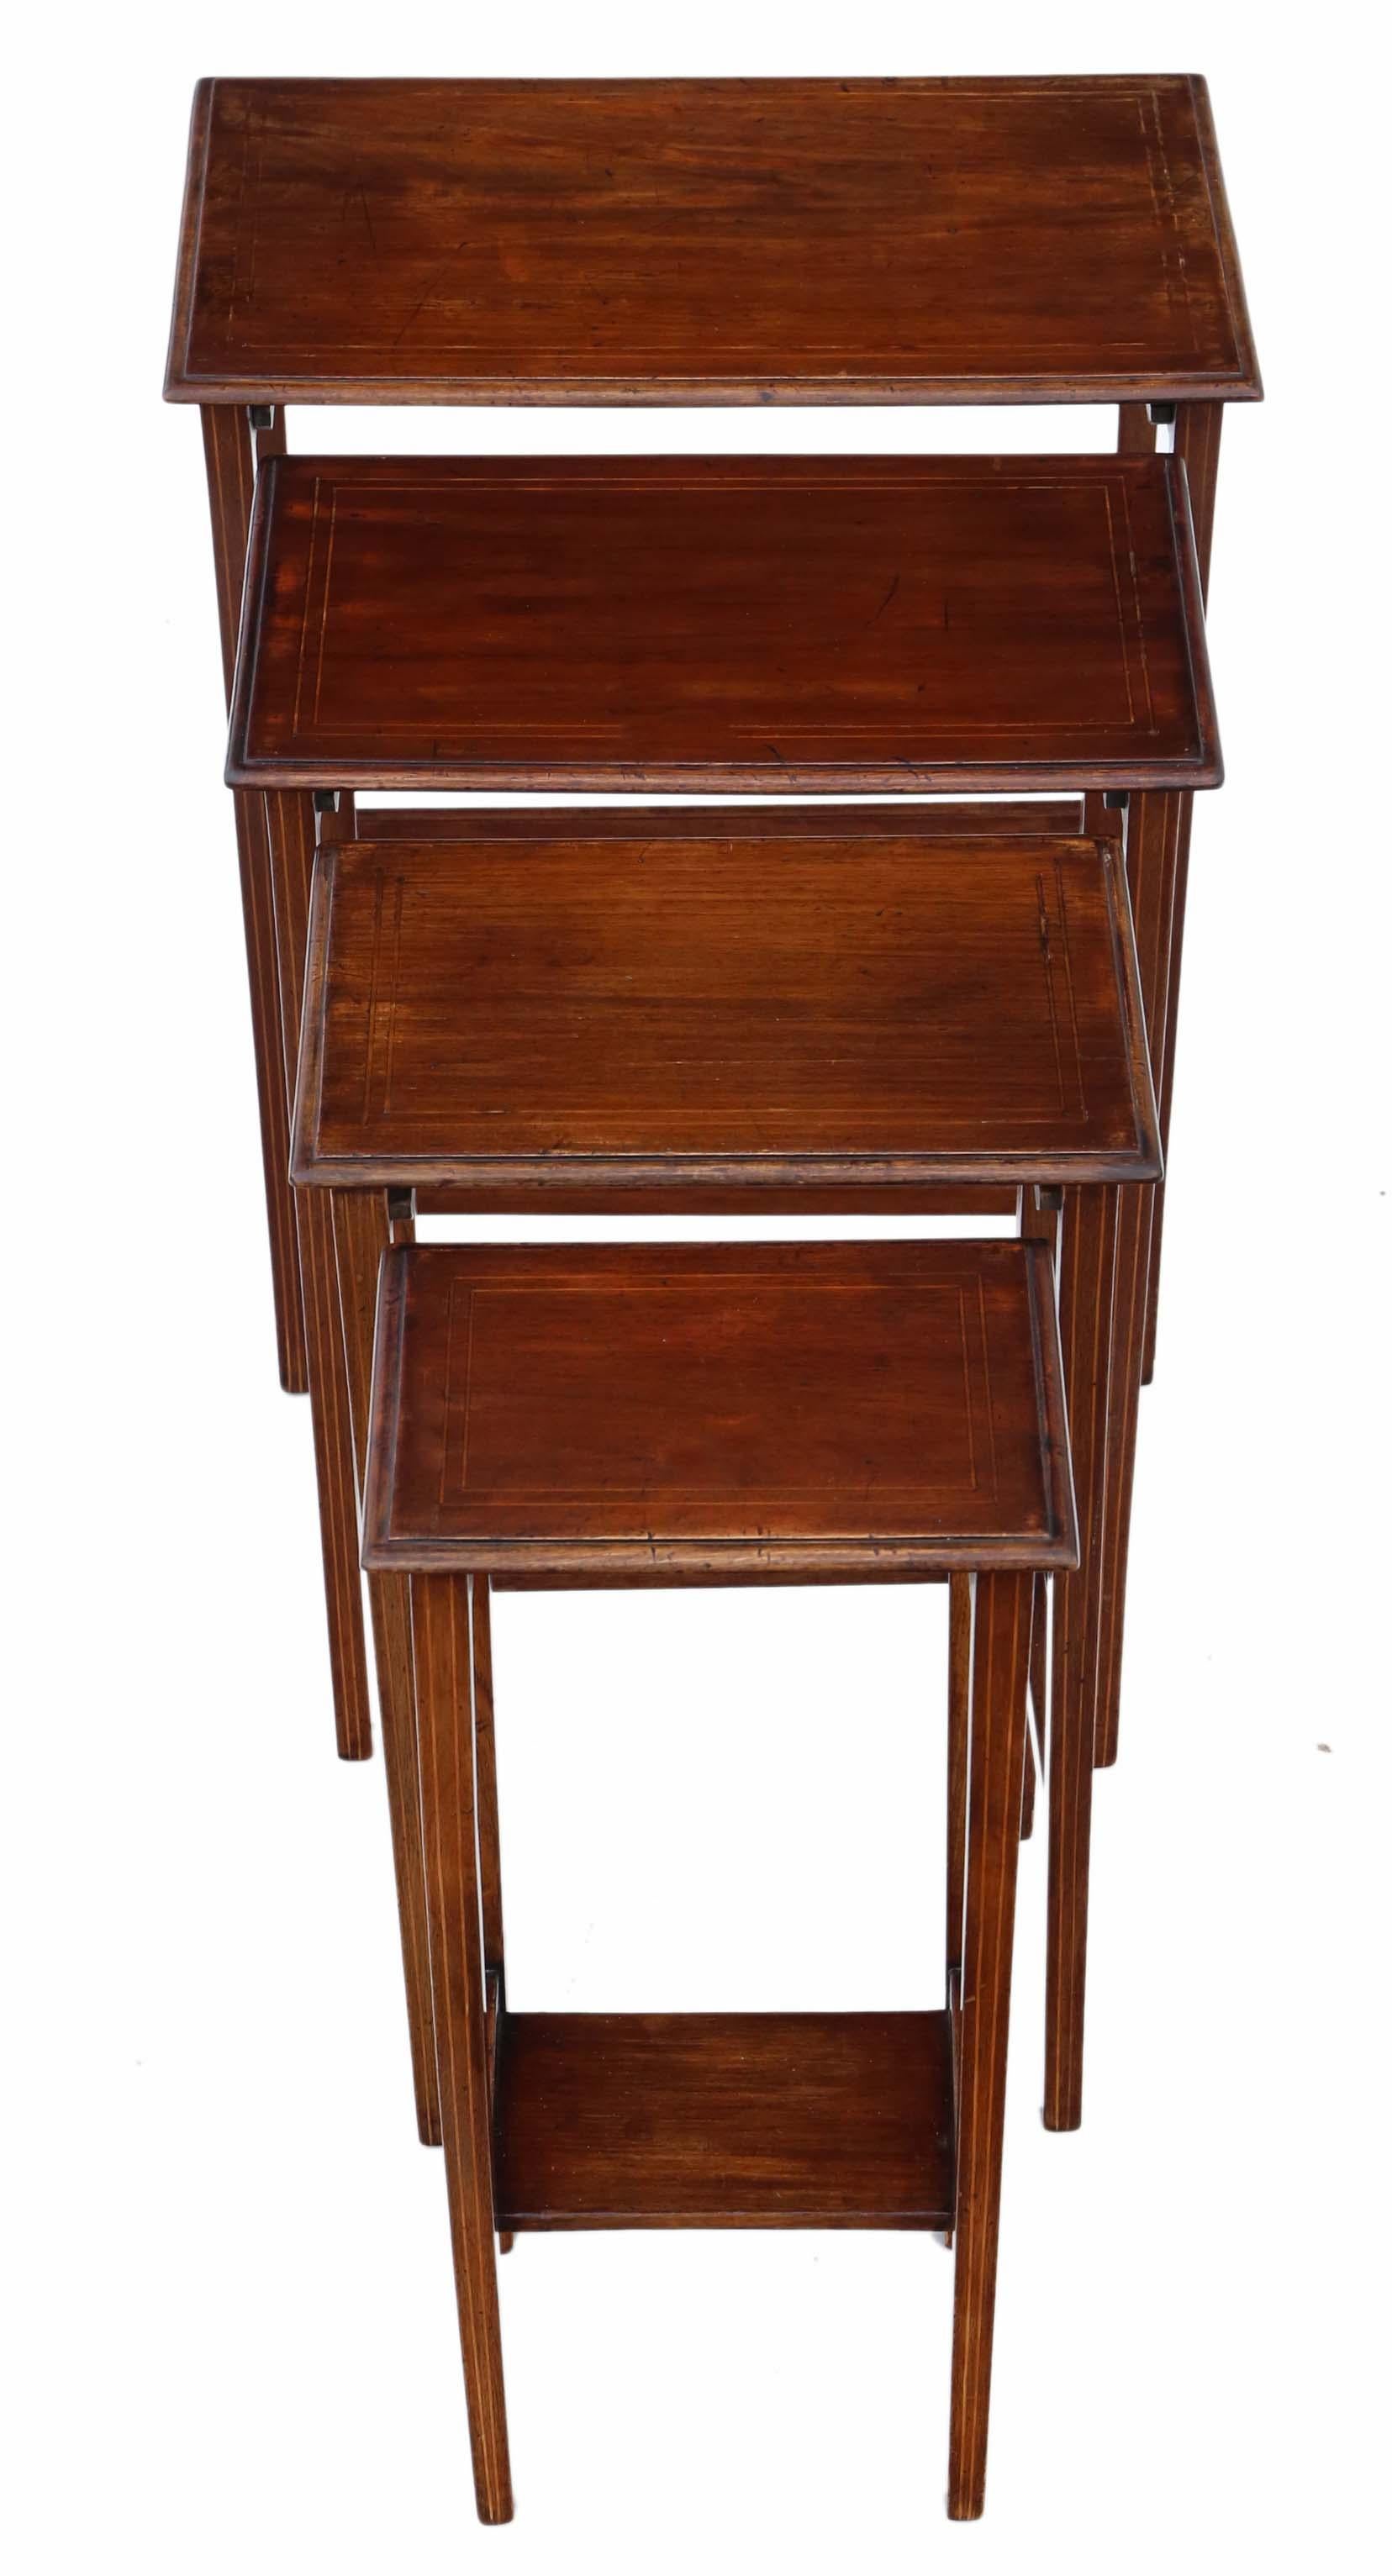 Early 20th Century Edwardian Inlaid Mahogany Nest of 4 Side Tables